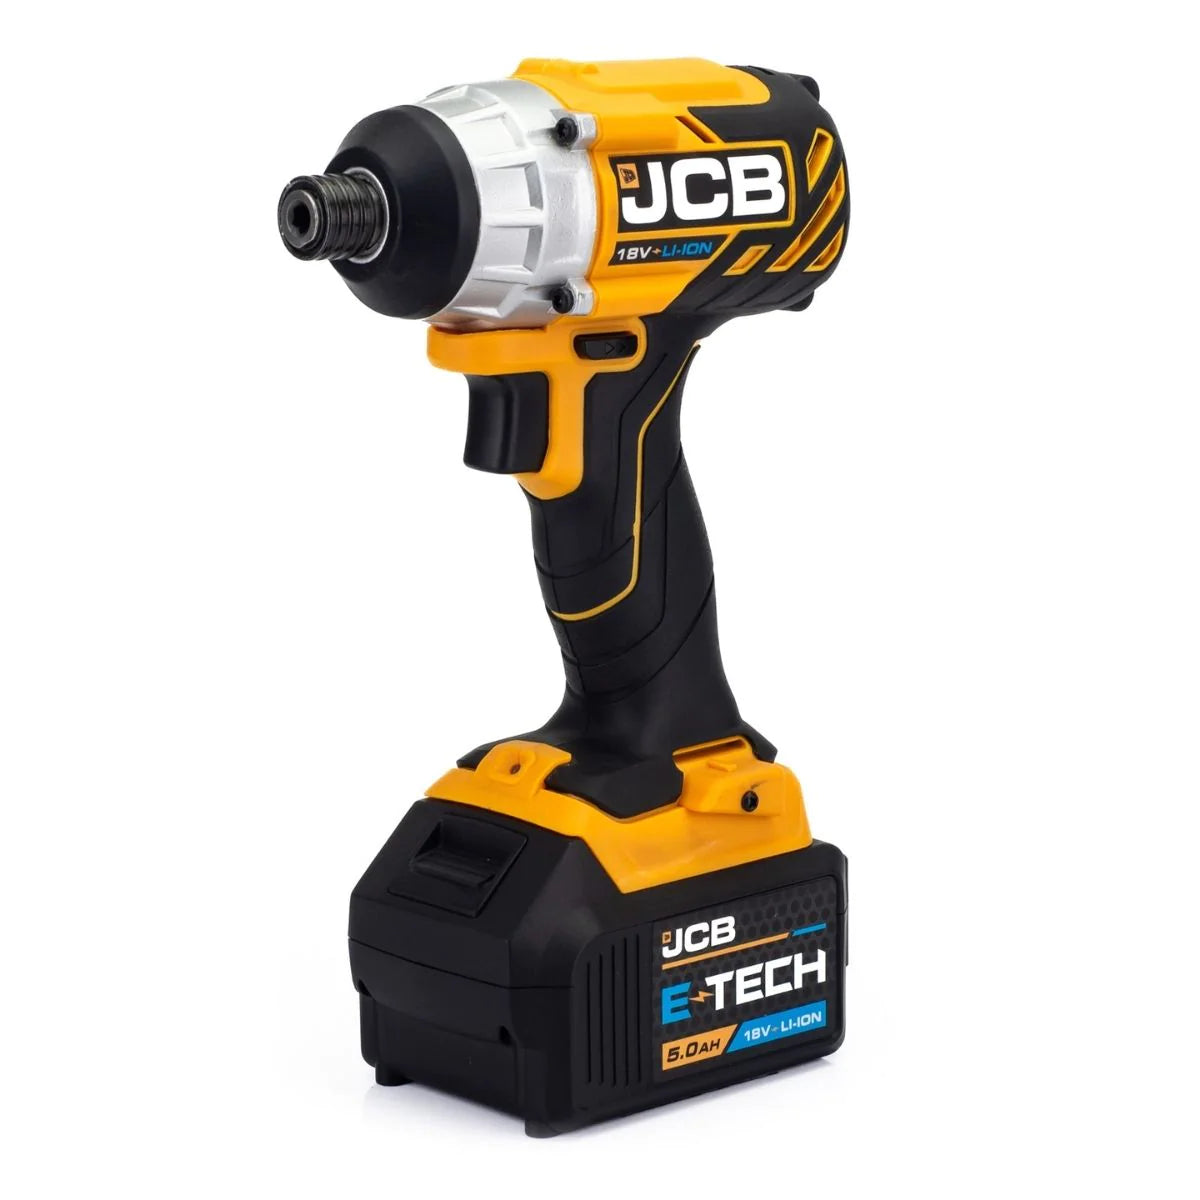 JCB 21-18BL-TPK-5 18V Brushless Combi Drill, Impact Twinpack with 2 x 5.0Ah Batteries, Charger & Bag